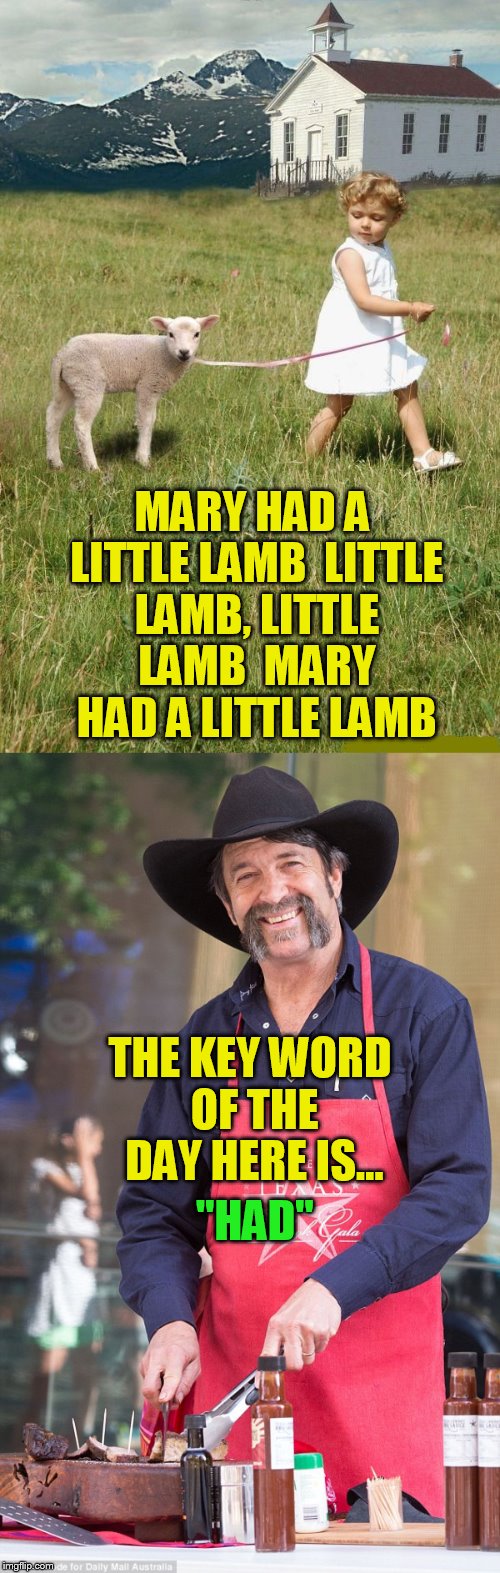 The Key Word Of The Day Is... |  MARY HAD A LITTLE LAMB
 LITTLE LAMB, LITTLE LAMB
 MARY HAD A LITTLE LAMB; THE KEY WORD OF THE DAY HERE IS... ''HAD'' | image tagged in funny meme,mary,lamb,word,funny,joke | made w/ Imgflip meme maker